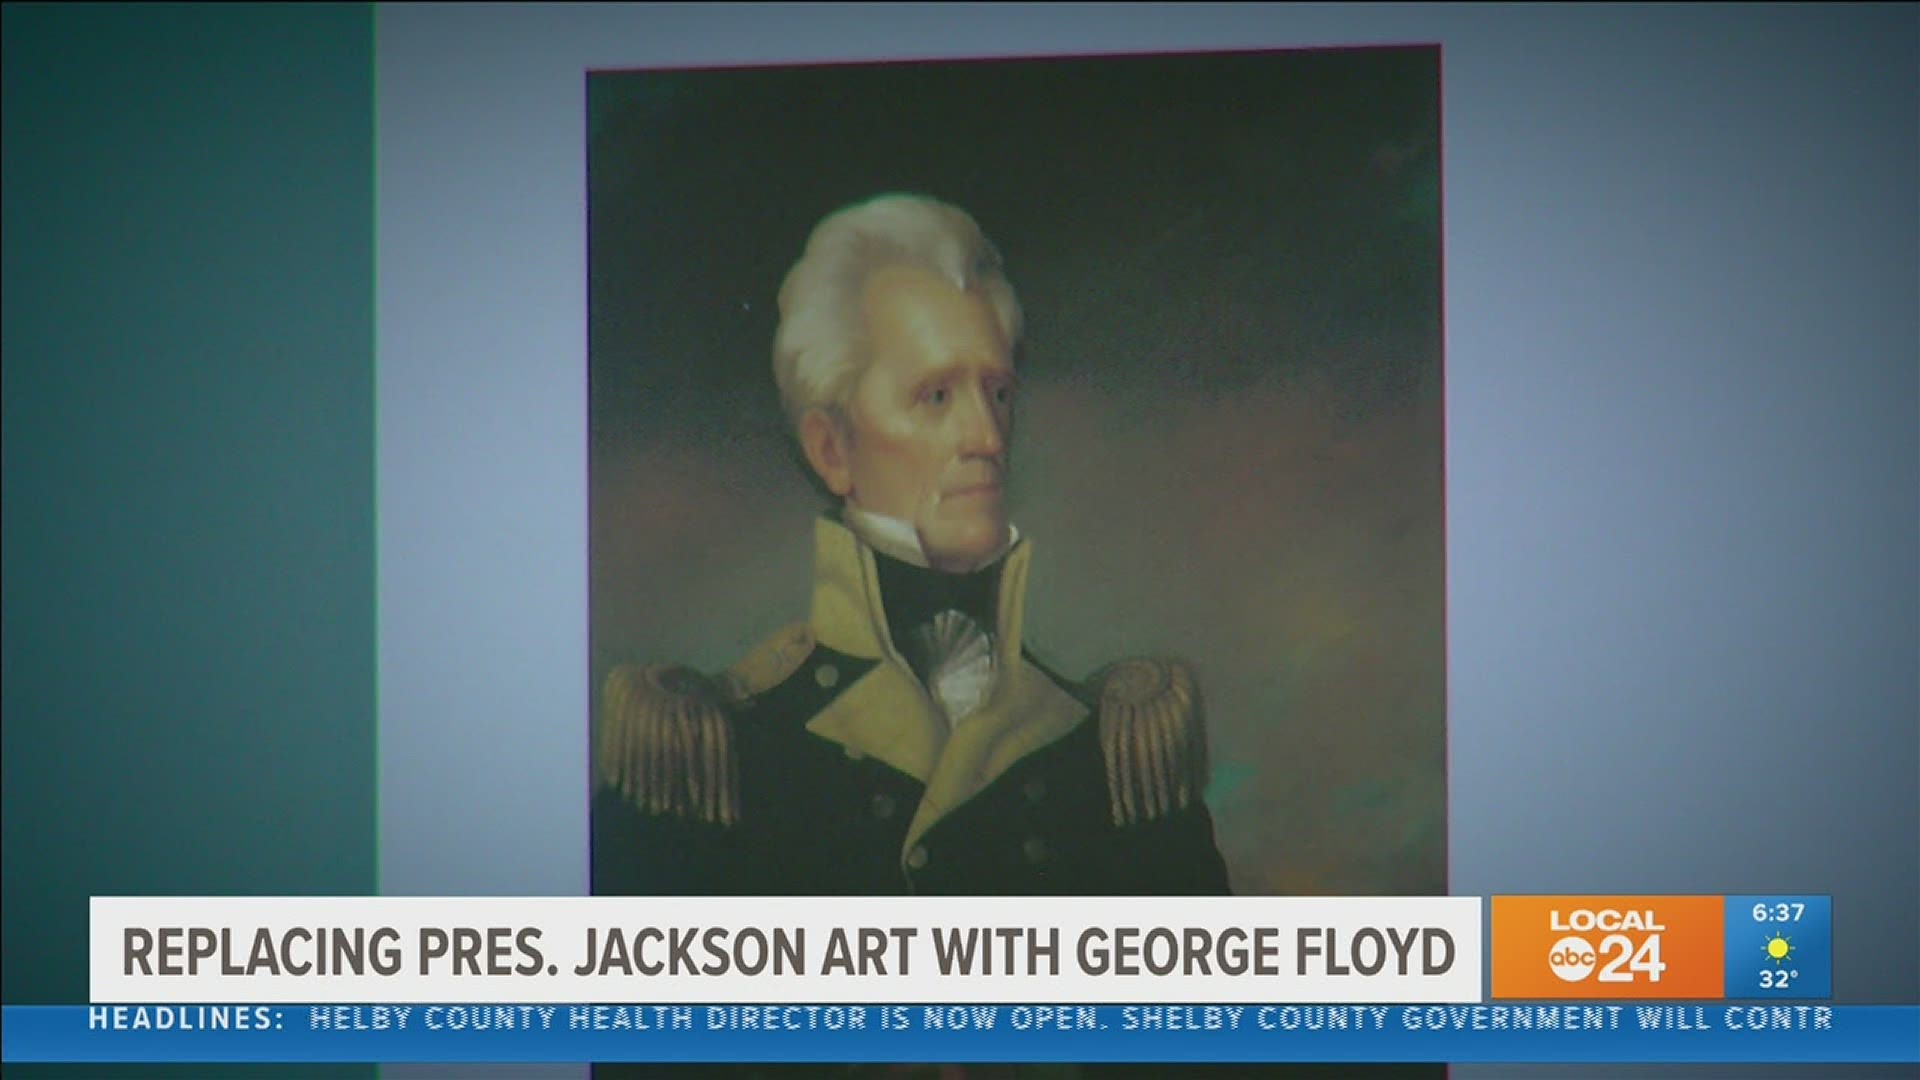 For decades, a portrait of President Andrew Jackson hung undisturbed in the Memphis Brooks Museum of Art. It's no longer on display.